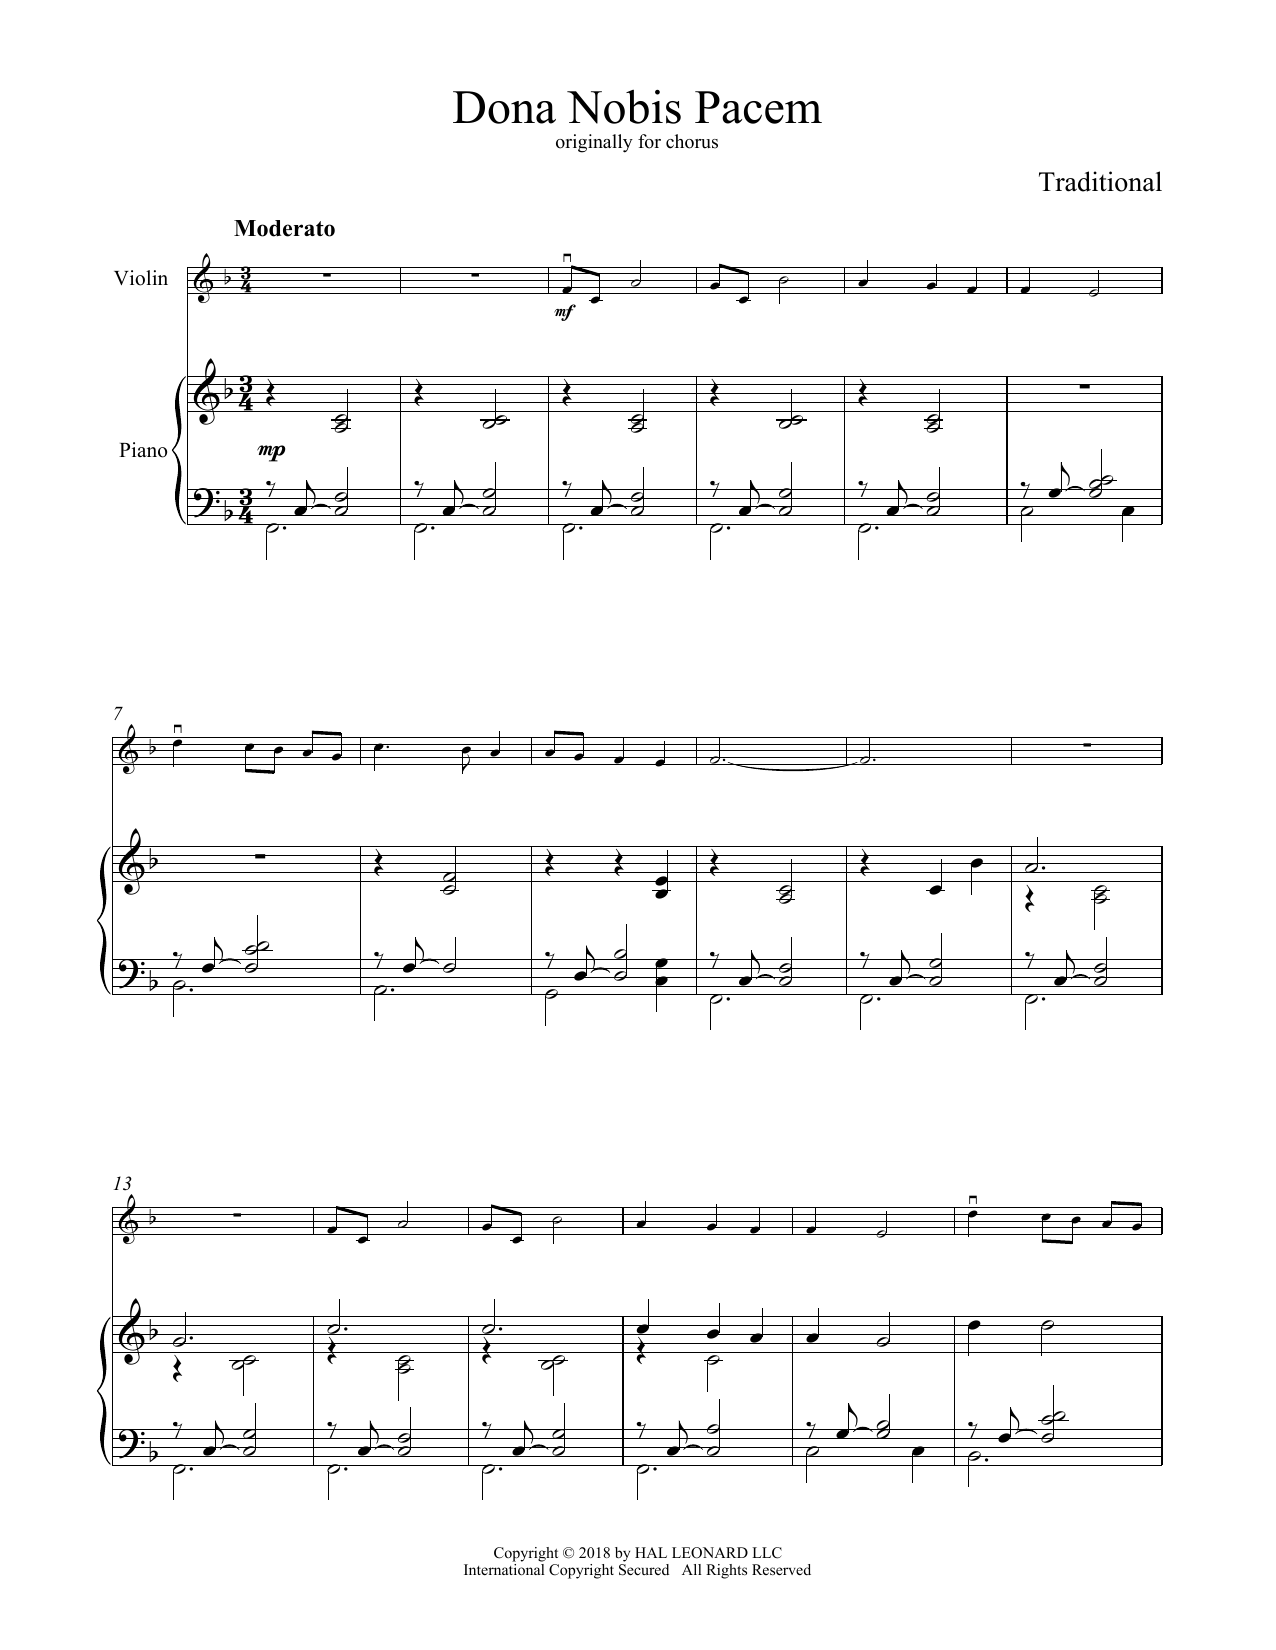 Download Traditional Canon Dona Nobis Pacem Sheet Music